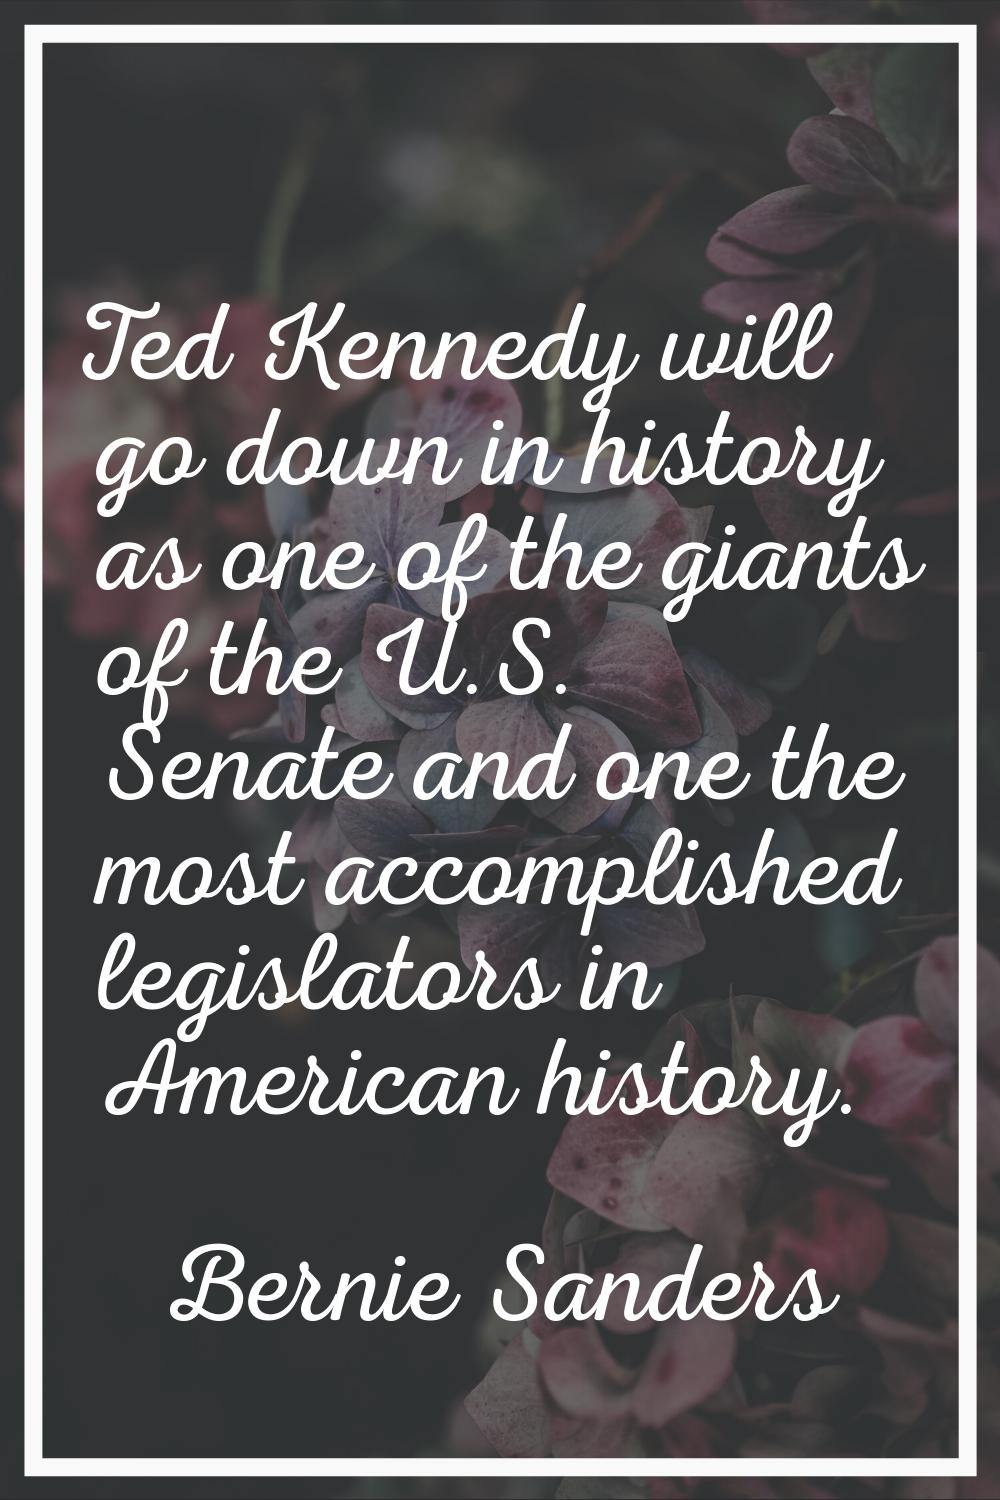 Ted Kennedy will go down in history as one of the giants of the U.S. Senate and one the most accomp